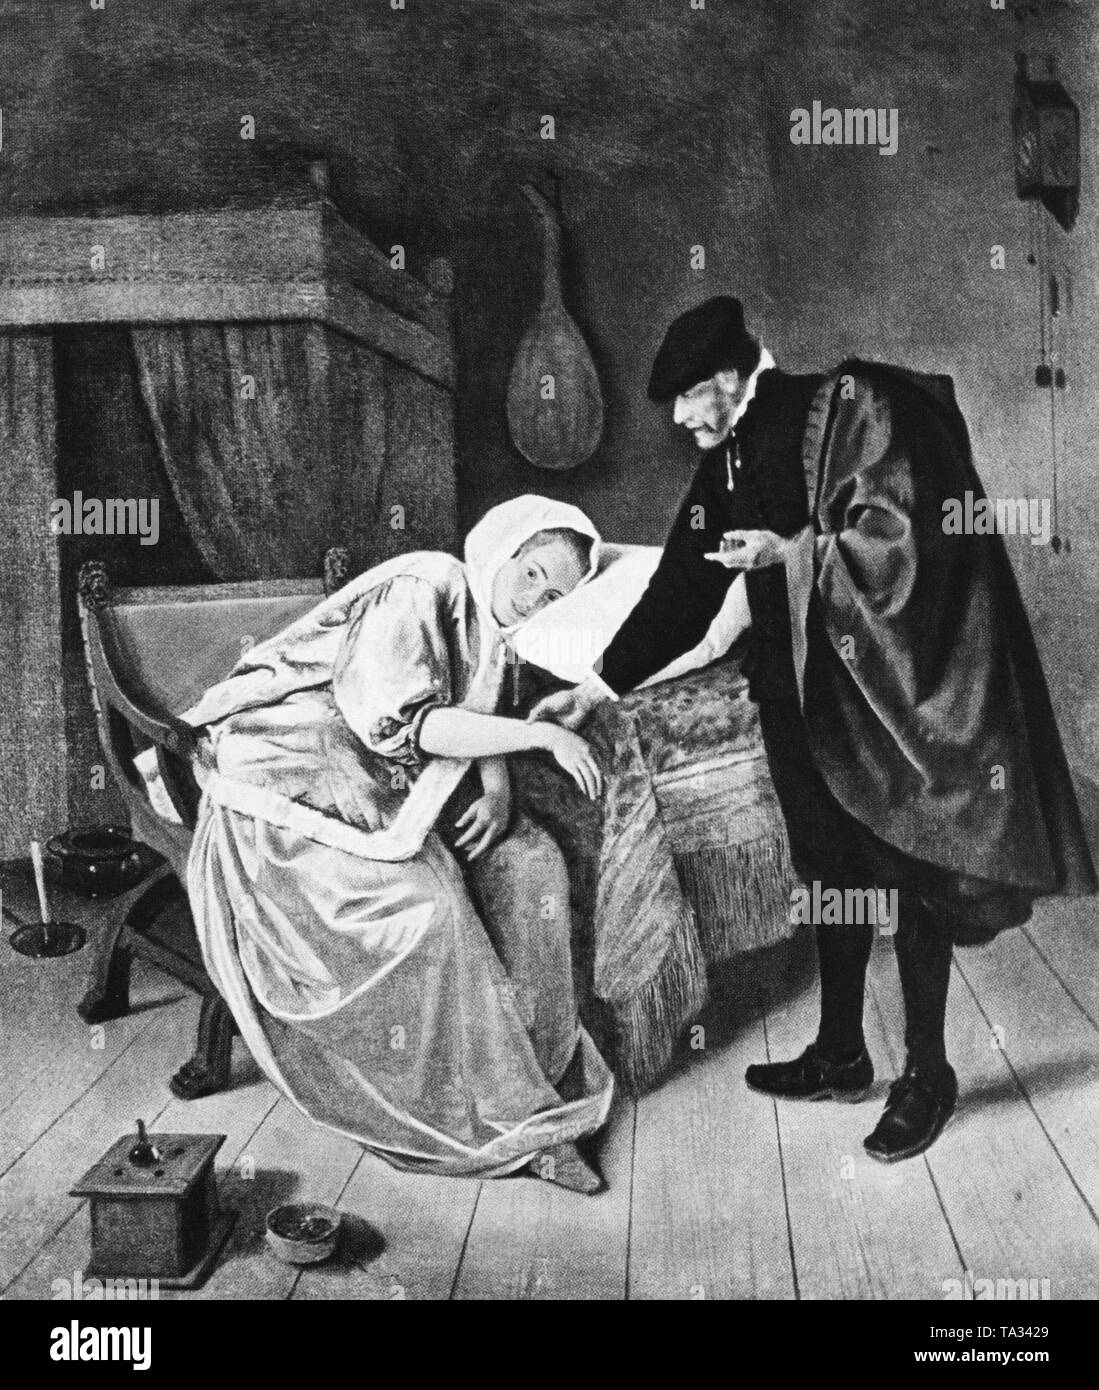 Sick woman is being examined by a doctor. The drawing is made by the Dutch painter Jan Steen. Undated photo, around 1626-1679. Stock Photo